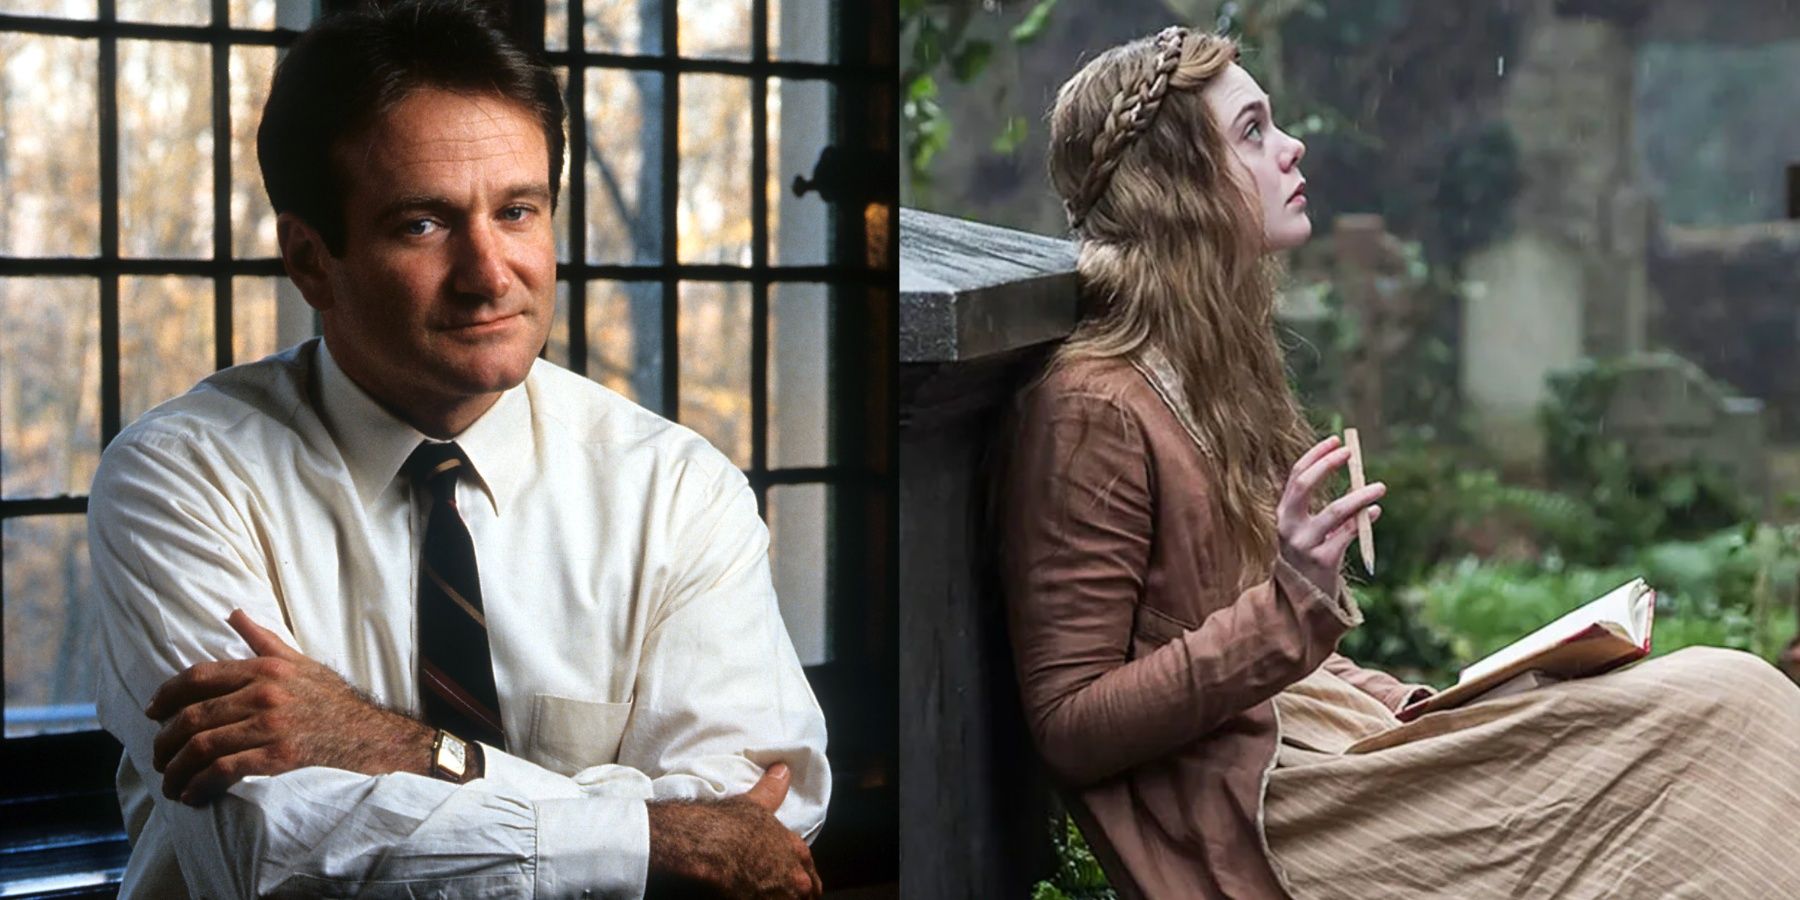 A side by side image features Robin William in Dead Poet's Soceity and Elle Fanning in Mary Shelley